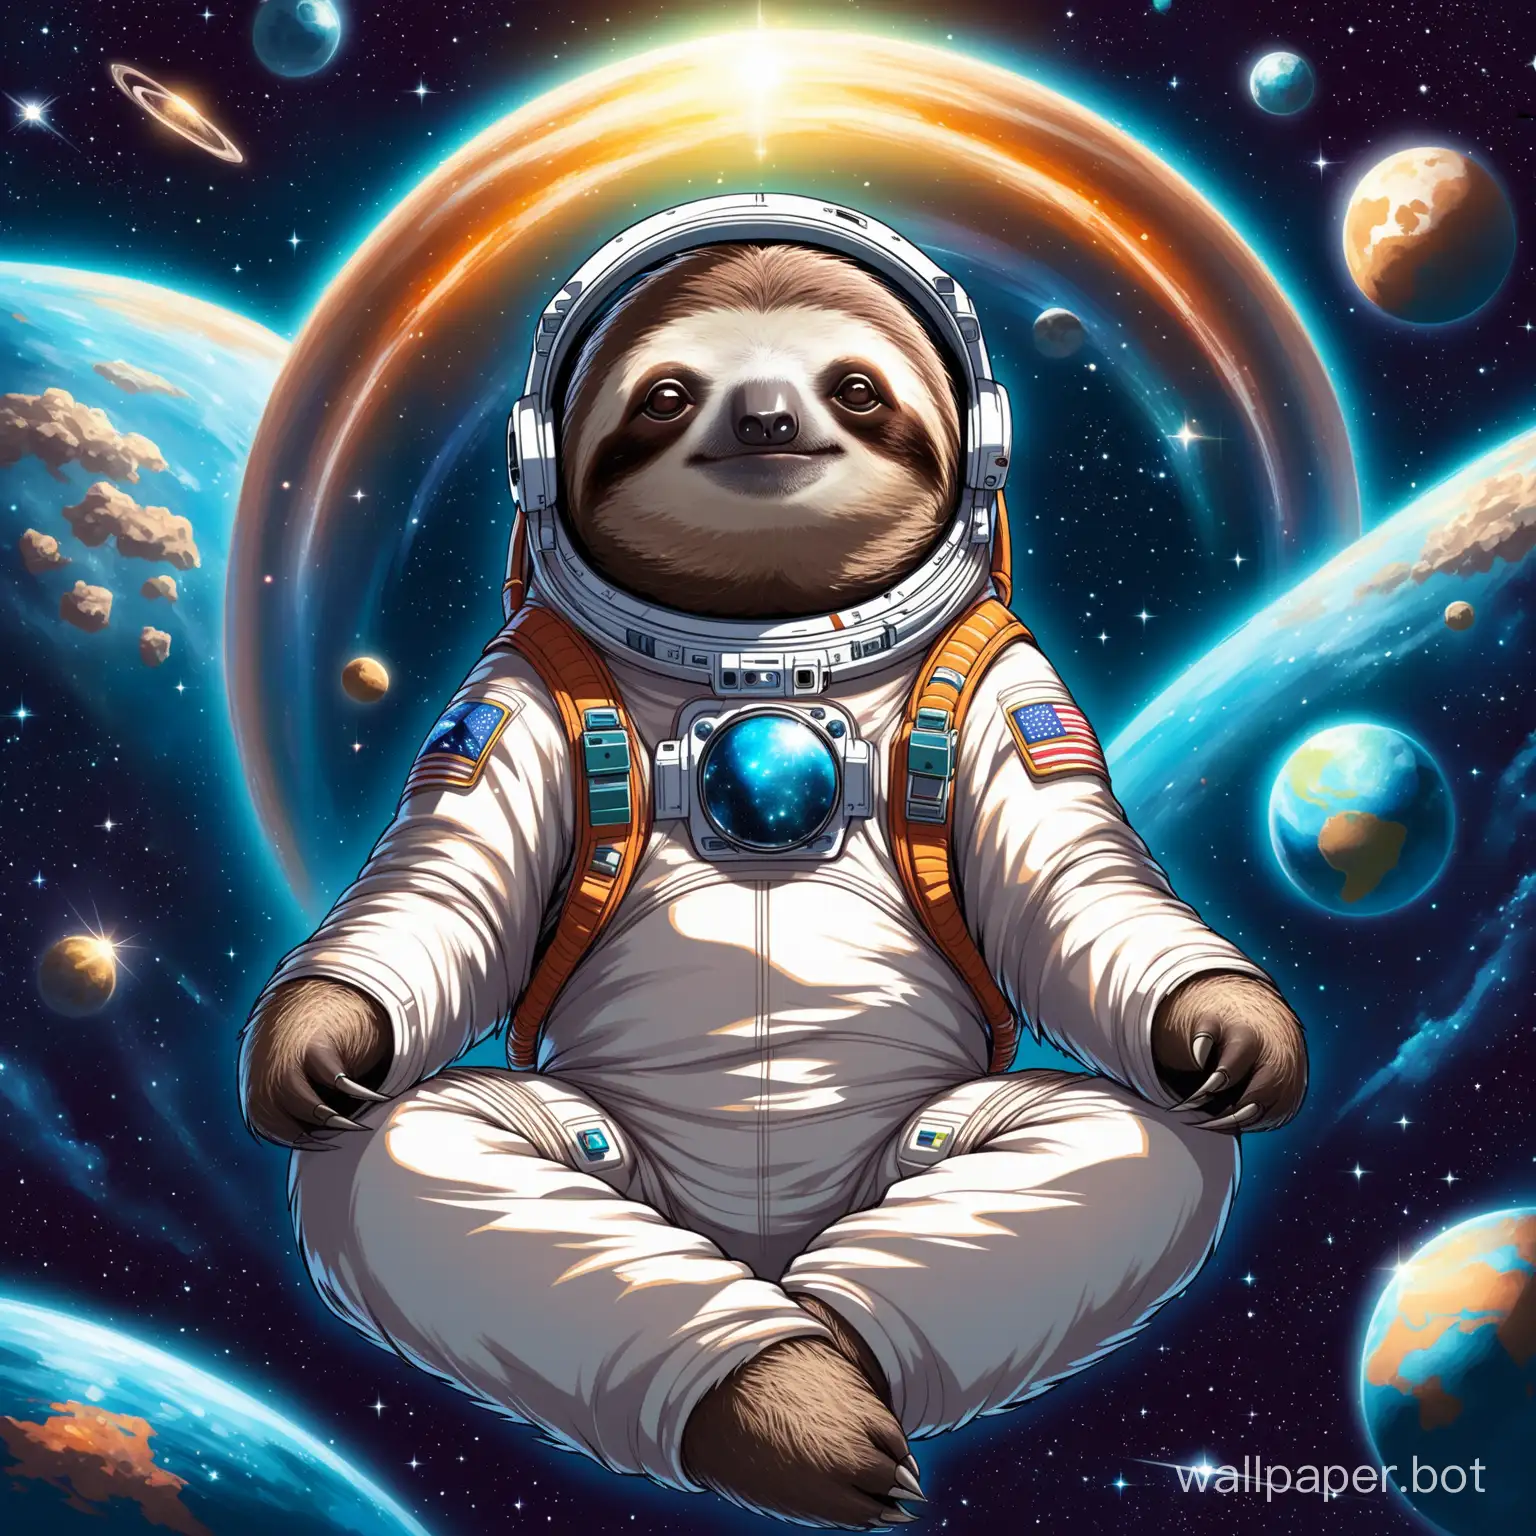 Cool sloth meditats in space